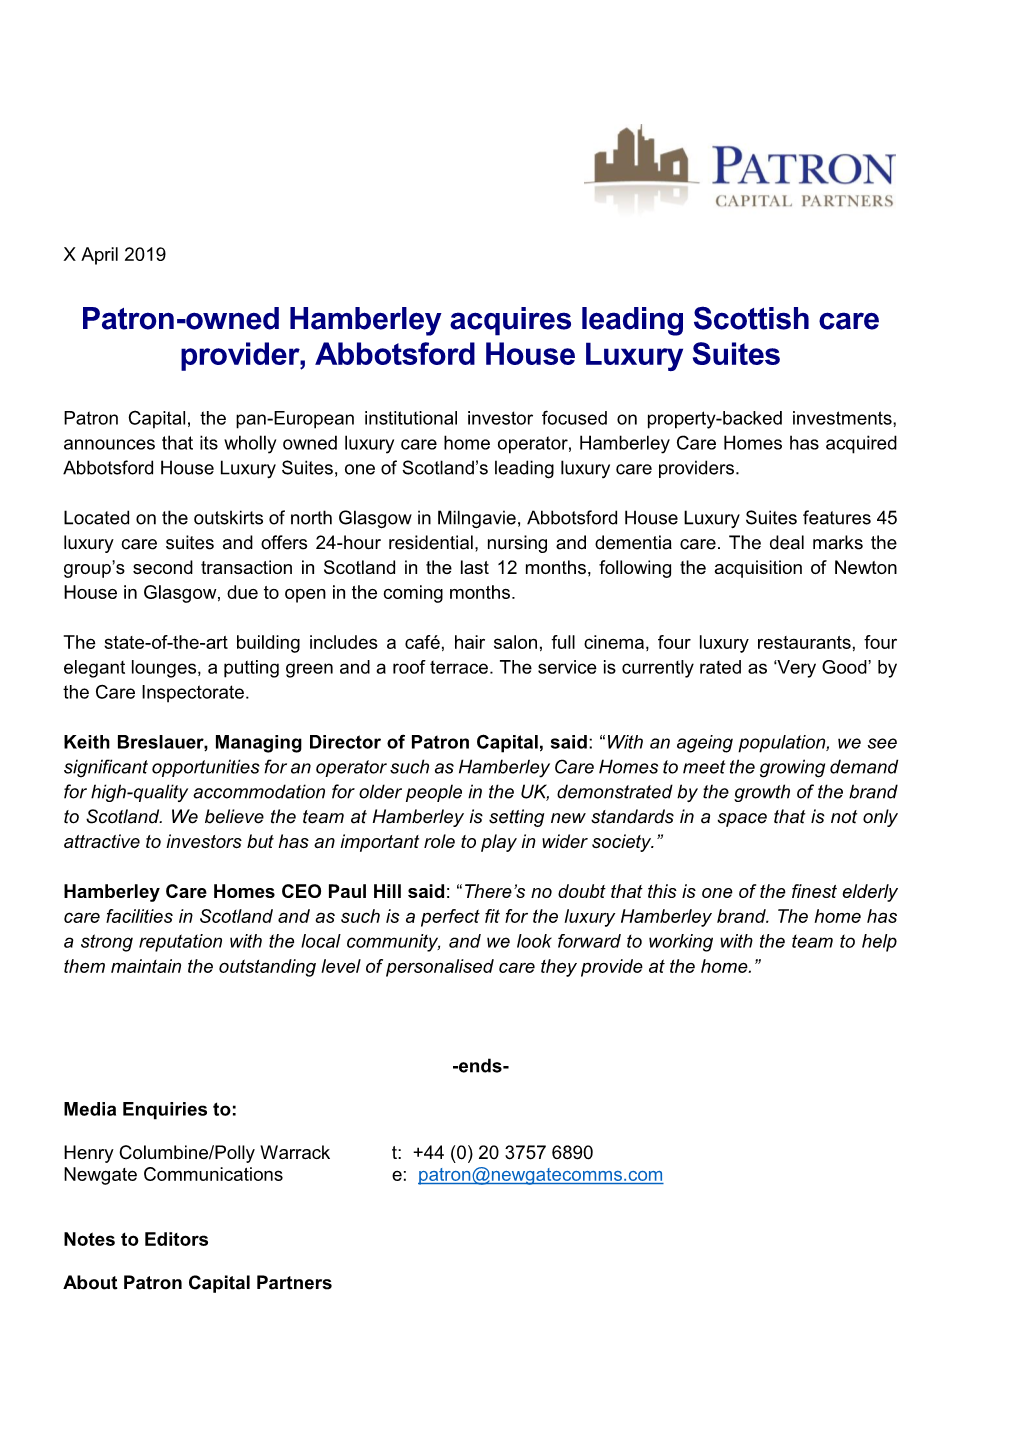 Patron-Owned Hamberley Acquires Leading Scottish Care Provider, Abbotsford House Luxury Suites